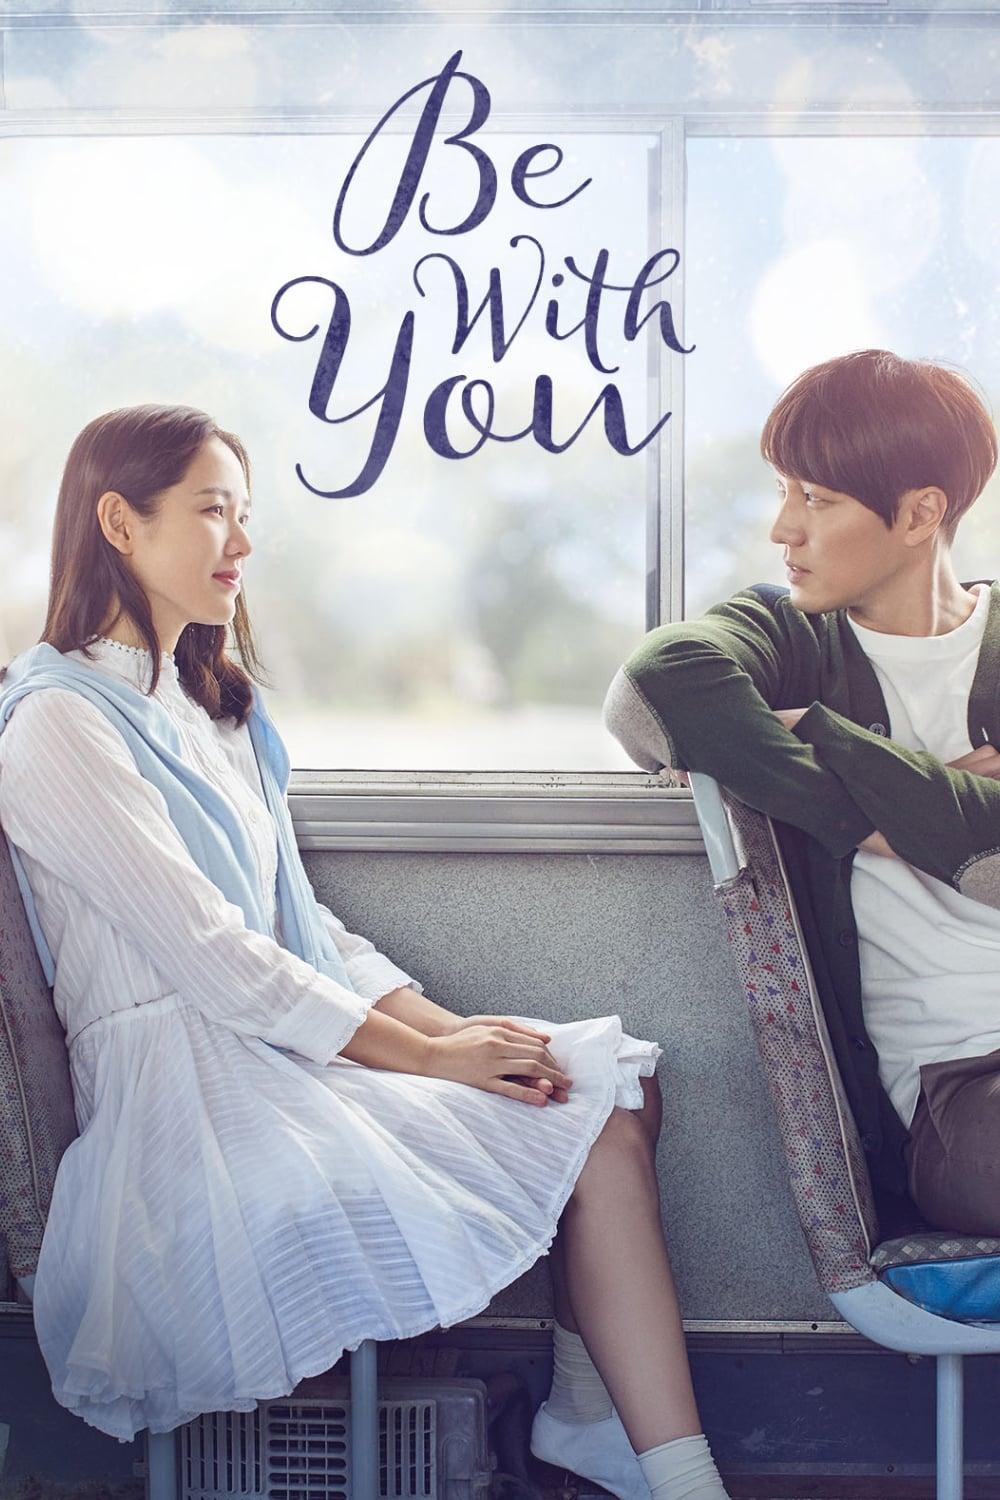 Be with You poster